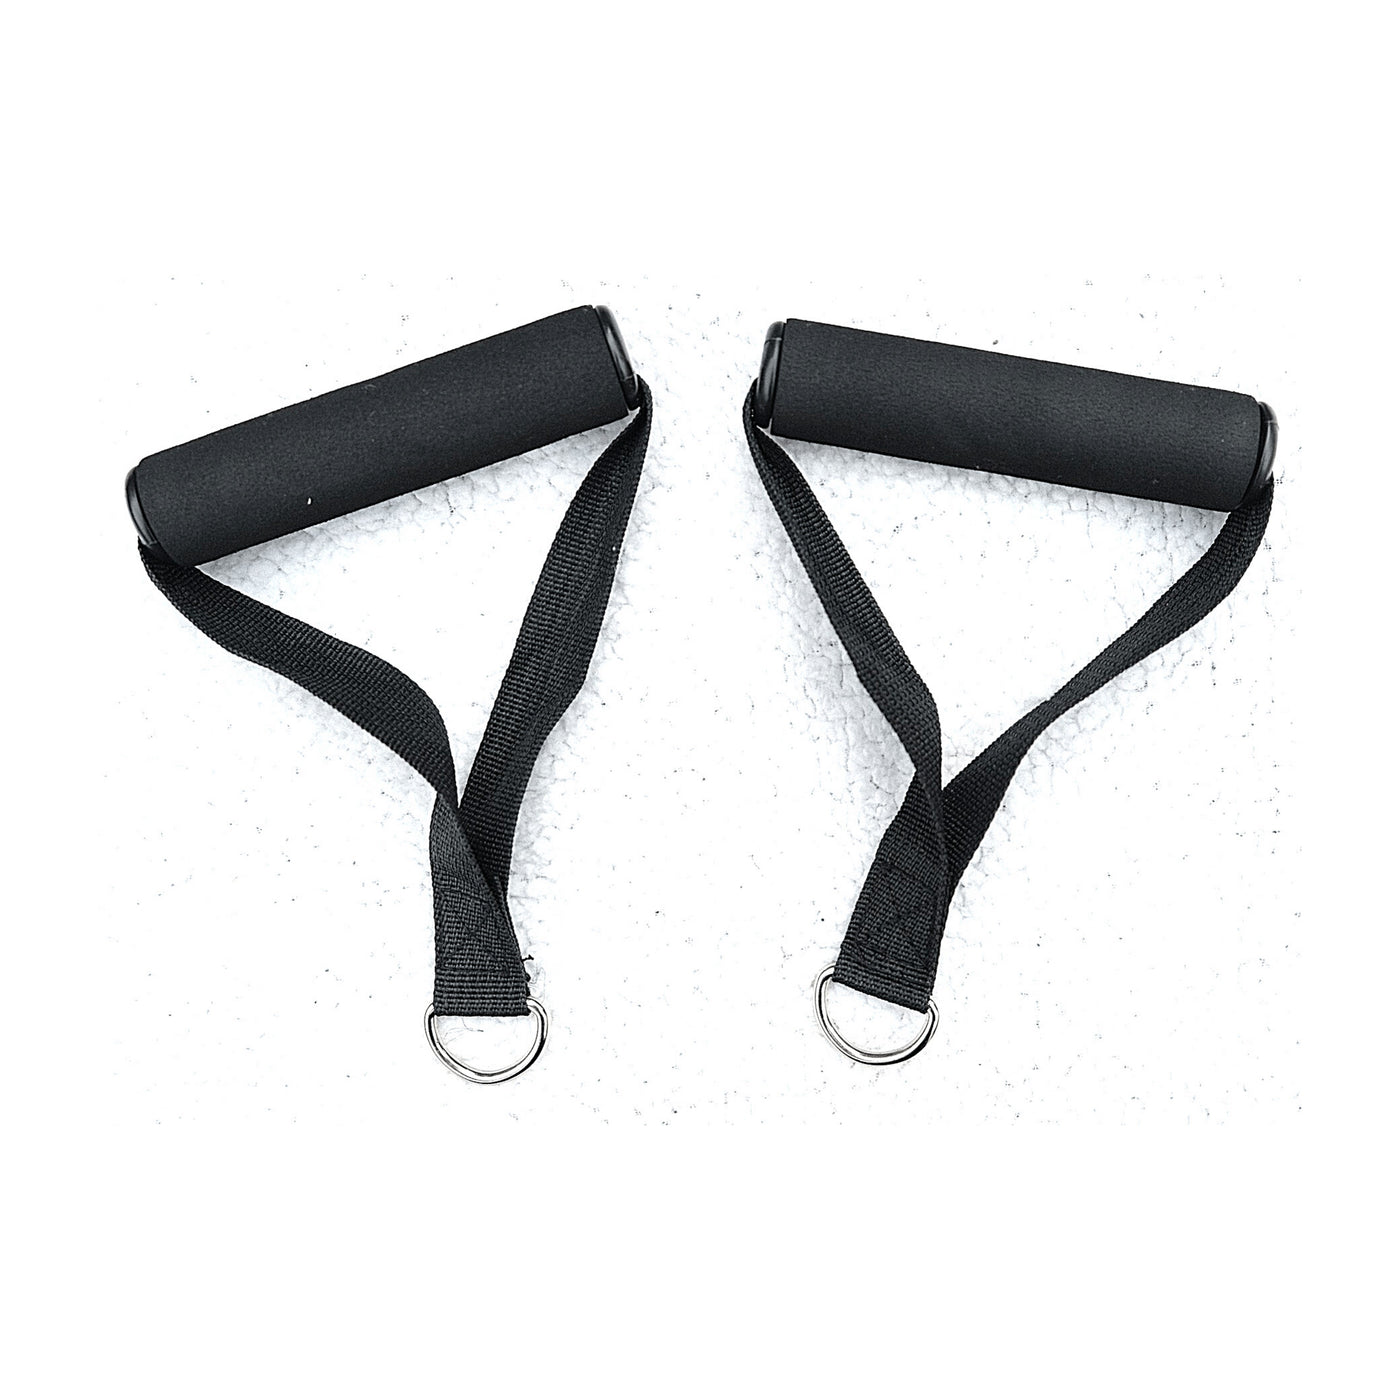 Resistance Bands Exercise | Bands With Handles 1 set of 5 (30 lbs) | 2 DAYS FREE UK SHIPPING Swimcore